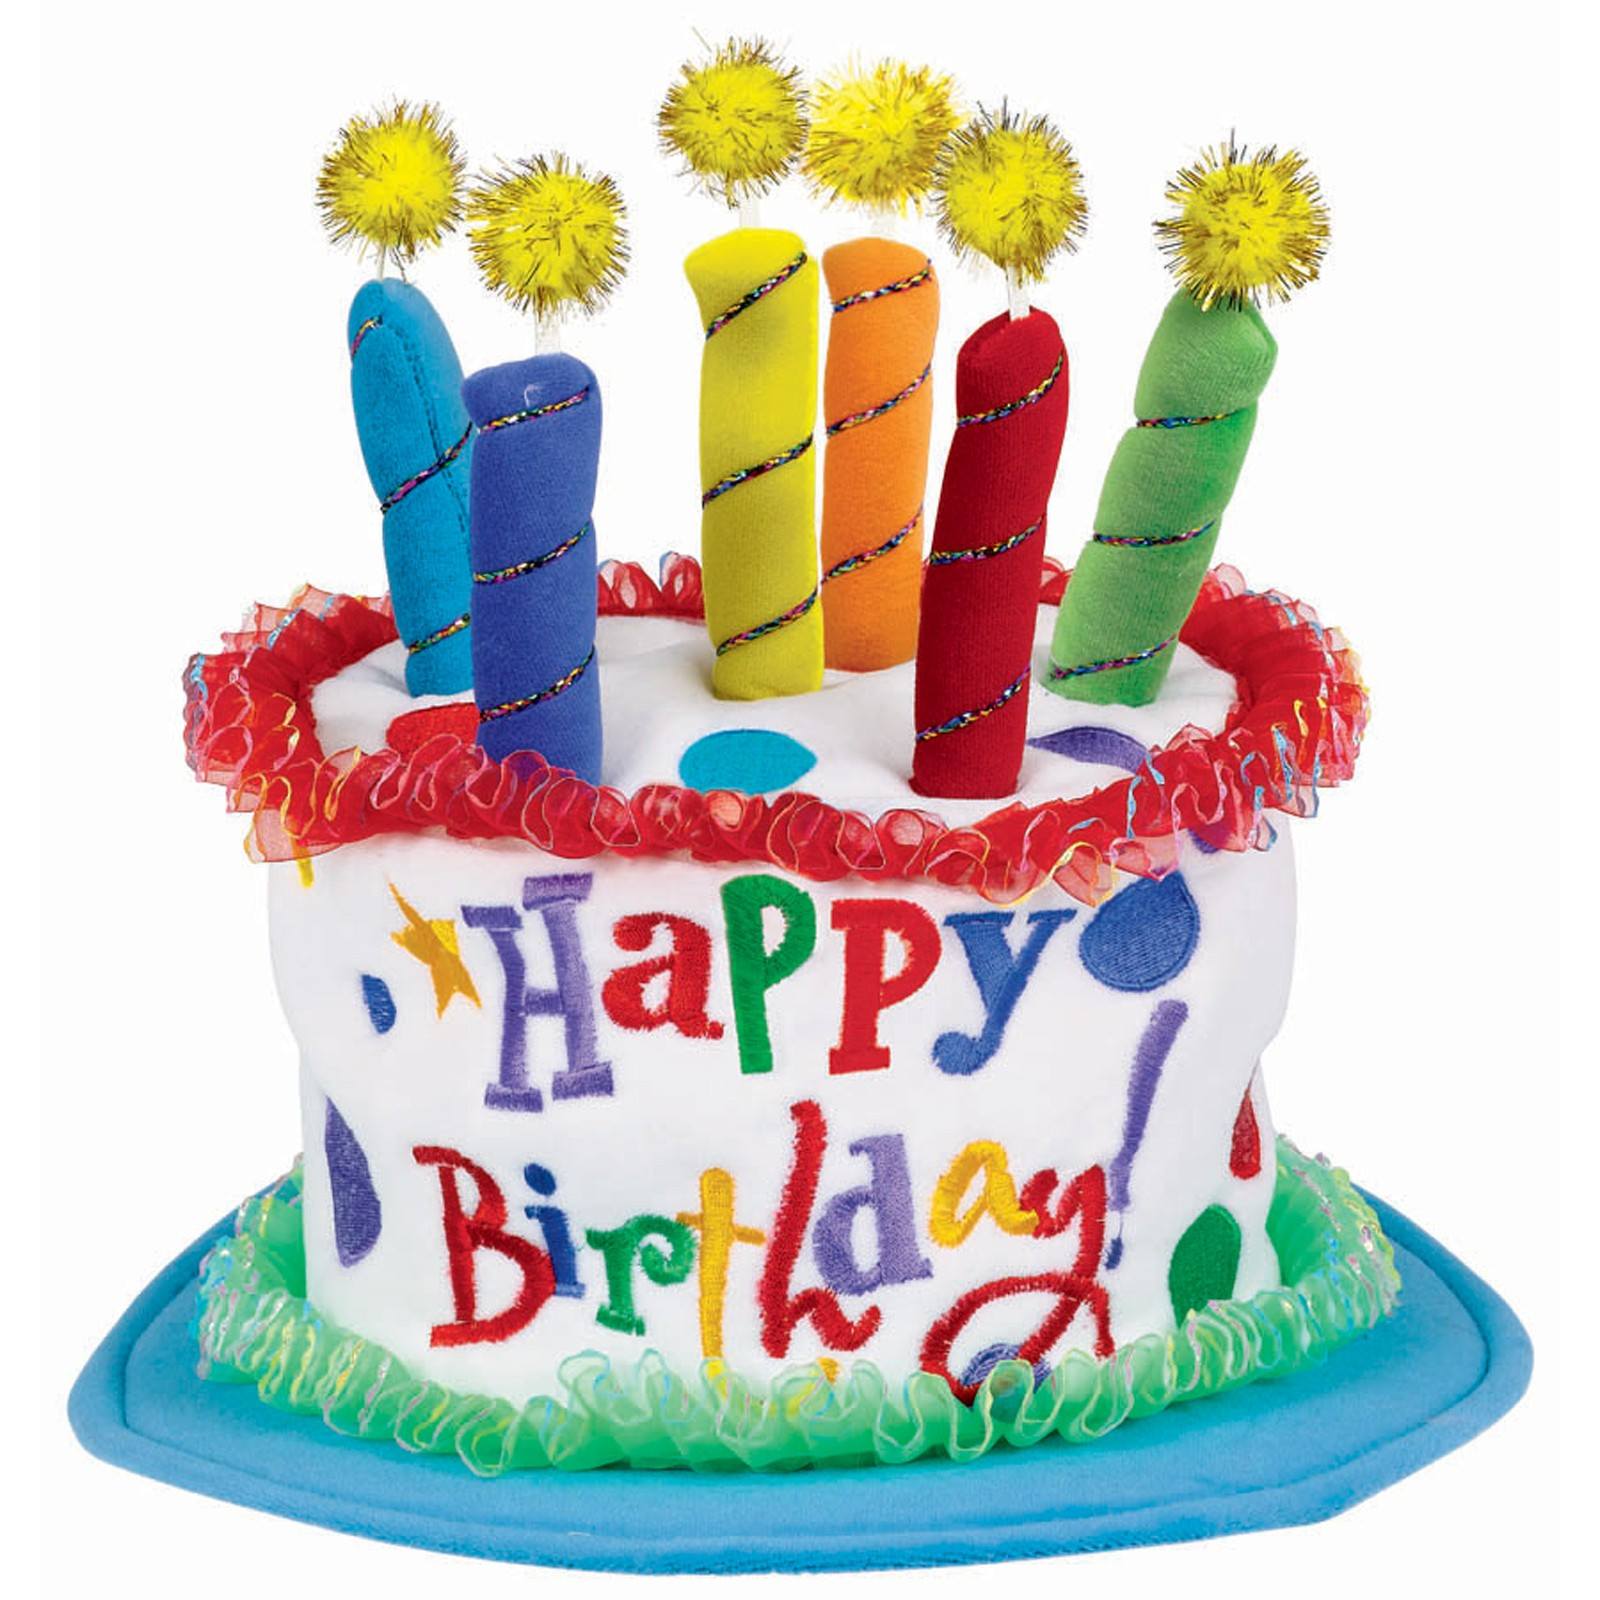 Birthday Cake Graphic
 Happy Birthday Cake With Name Edit For